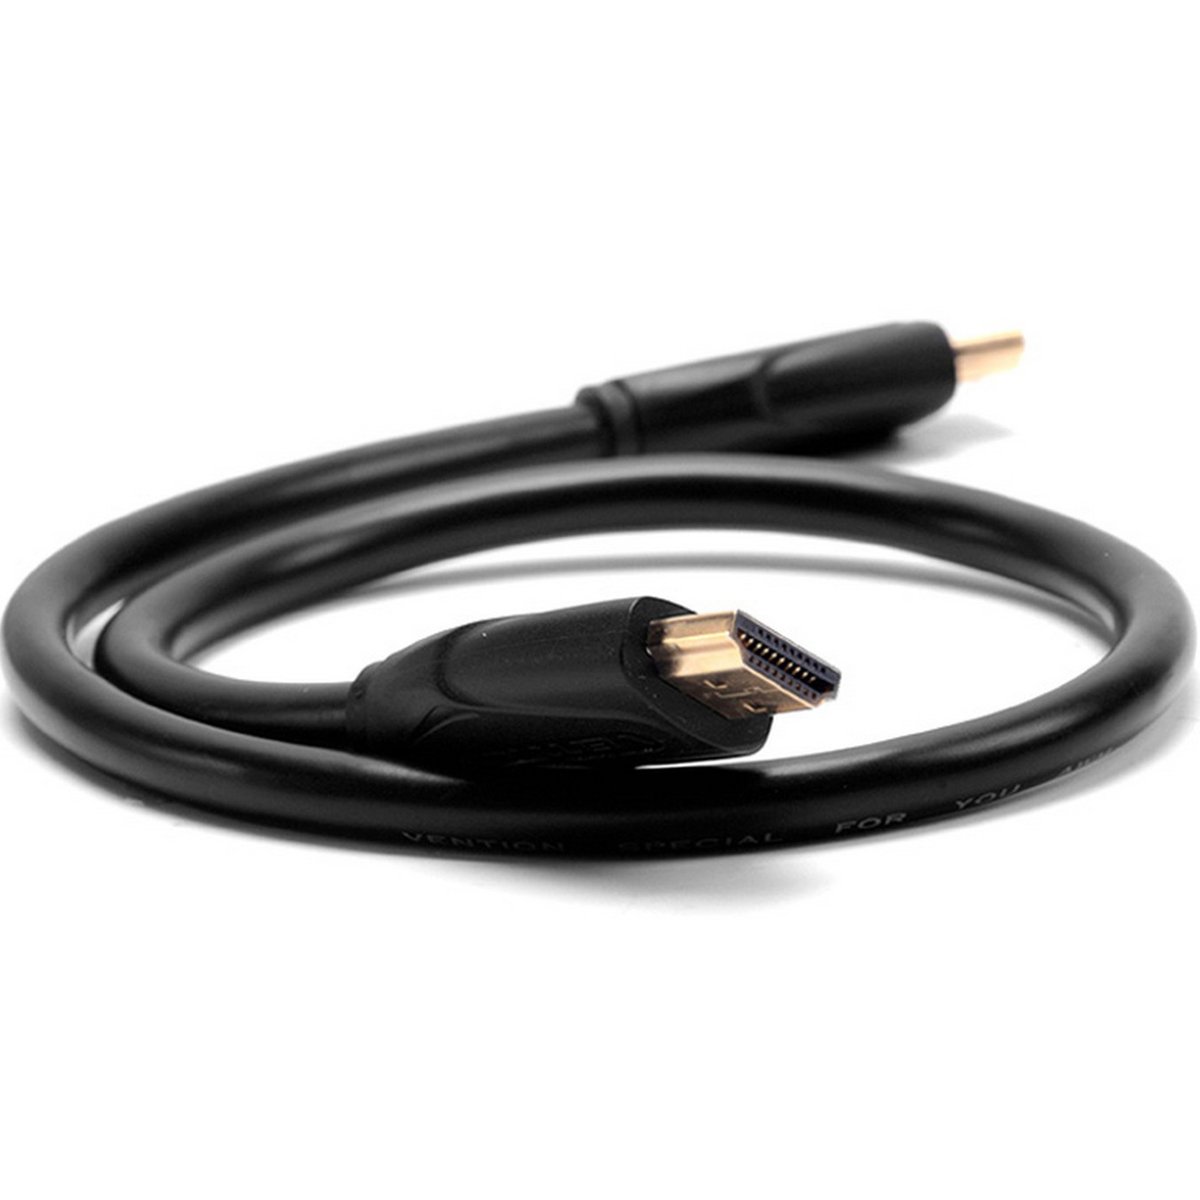 Iends HDMI Cable IE-CA5182 5Meter